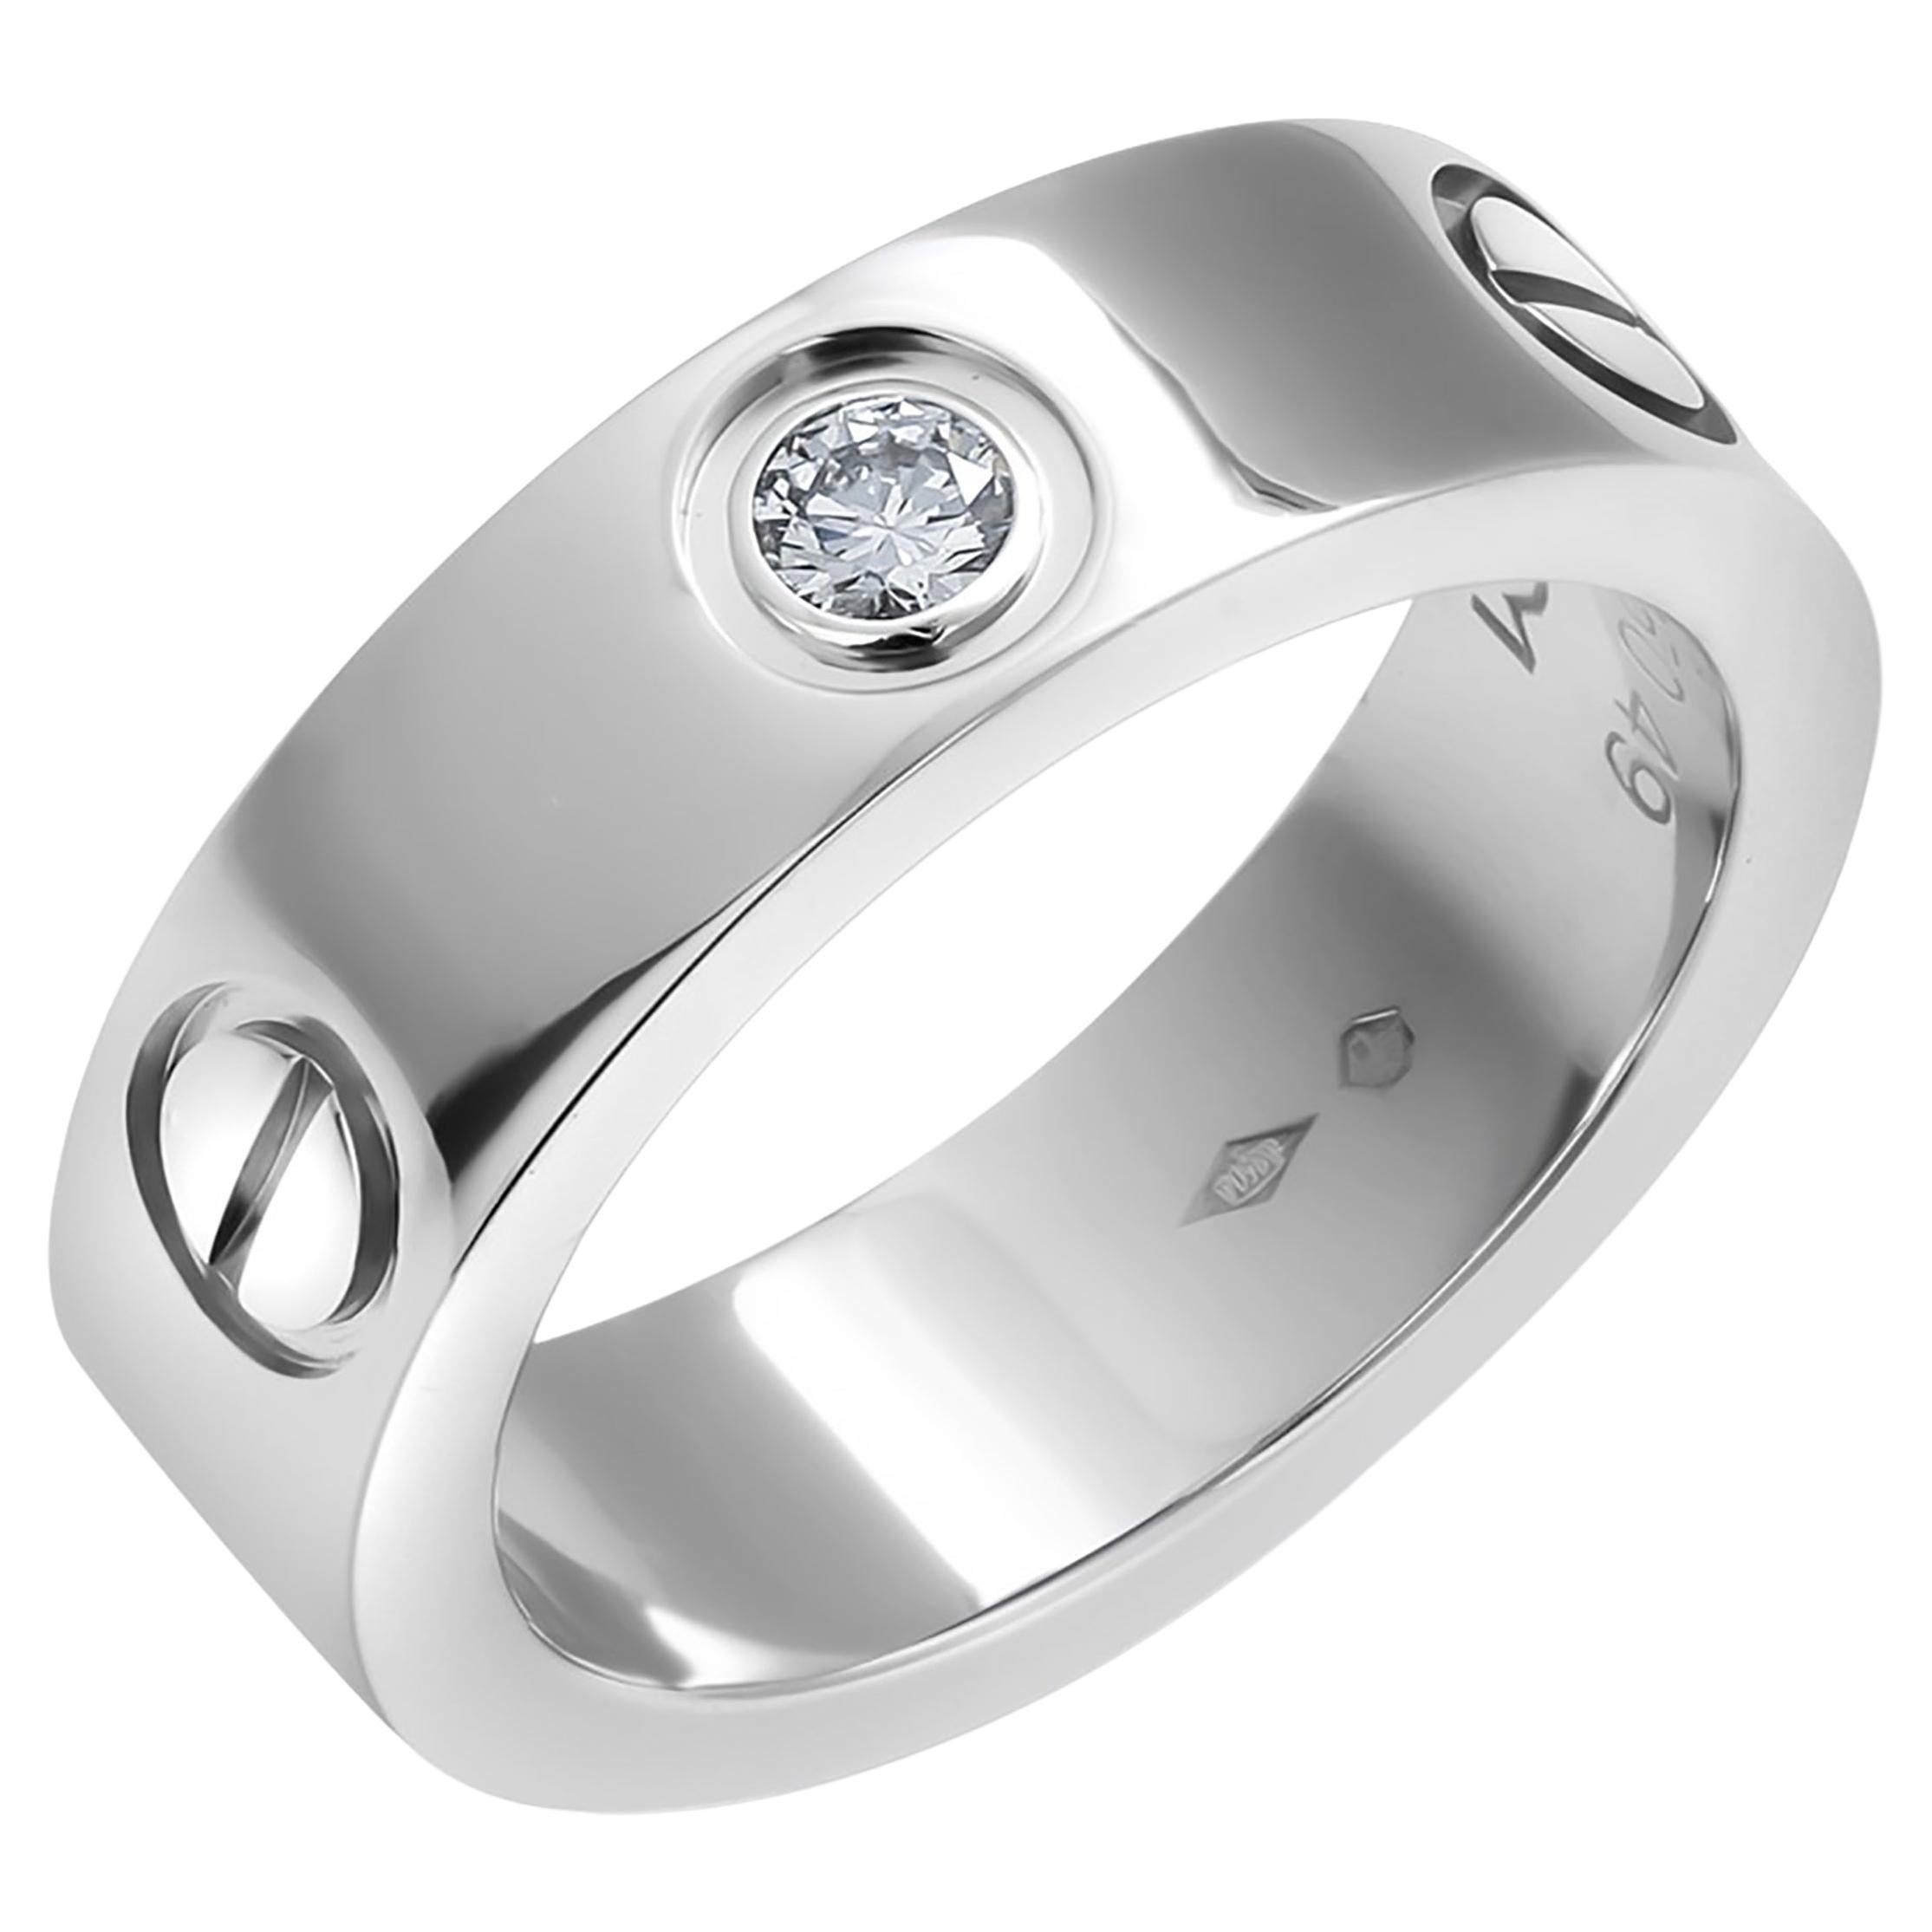 Purchase the High-Quality Men's Fancy Wedding Rings | GLAMIRA.com